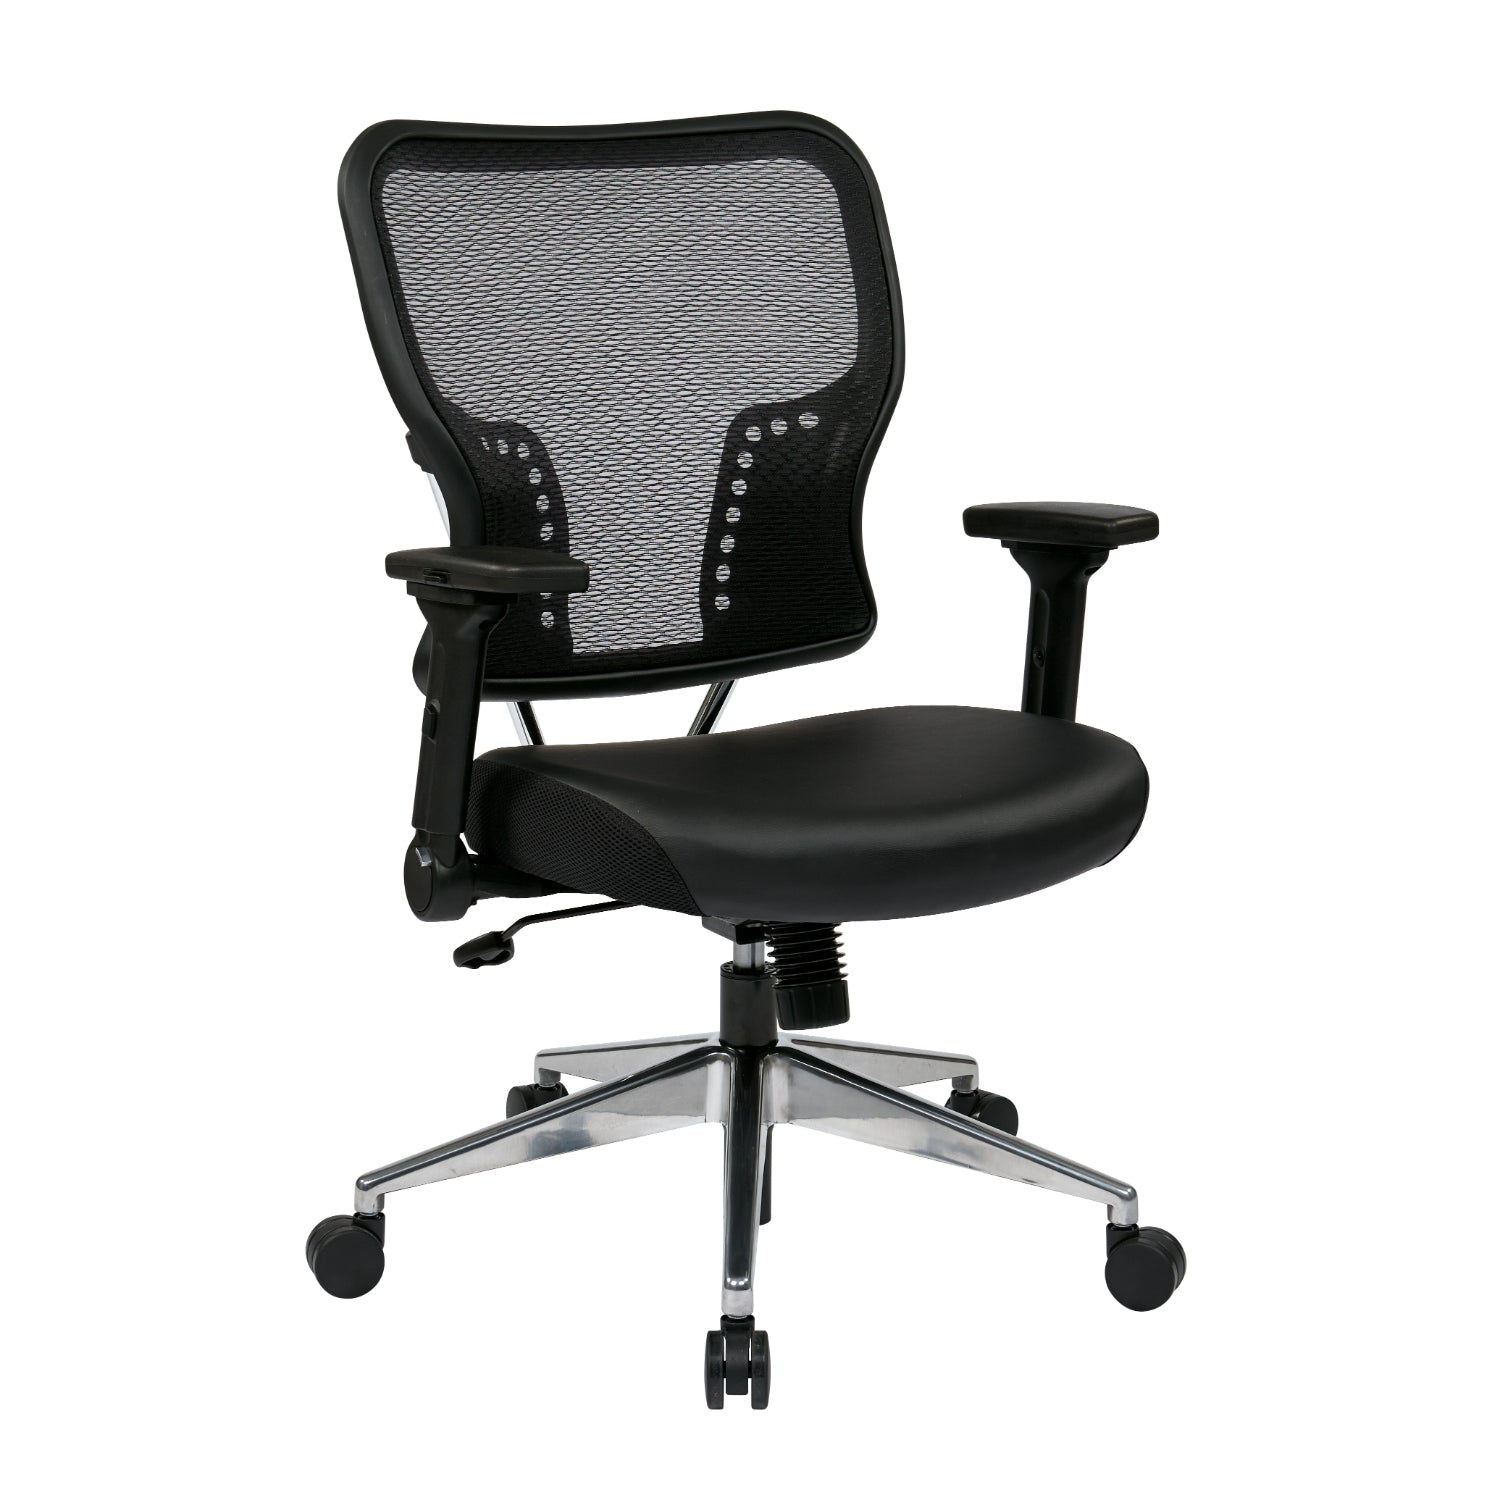 Air Grid® Back Manager's Chair with Padded Bonded Leather Seat, 4-Way Adjustable Flip Arms, Built-in Lumbar Support and Polished Aluminum Base